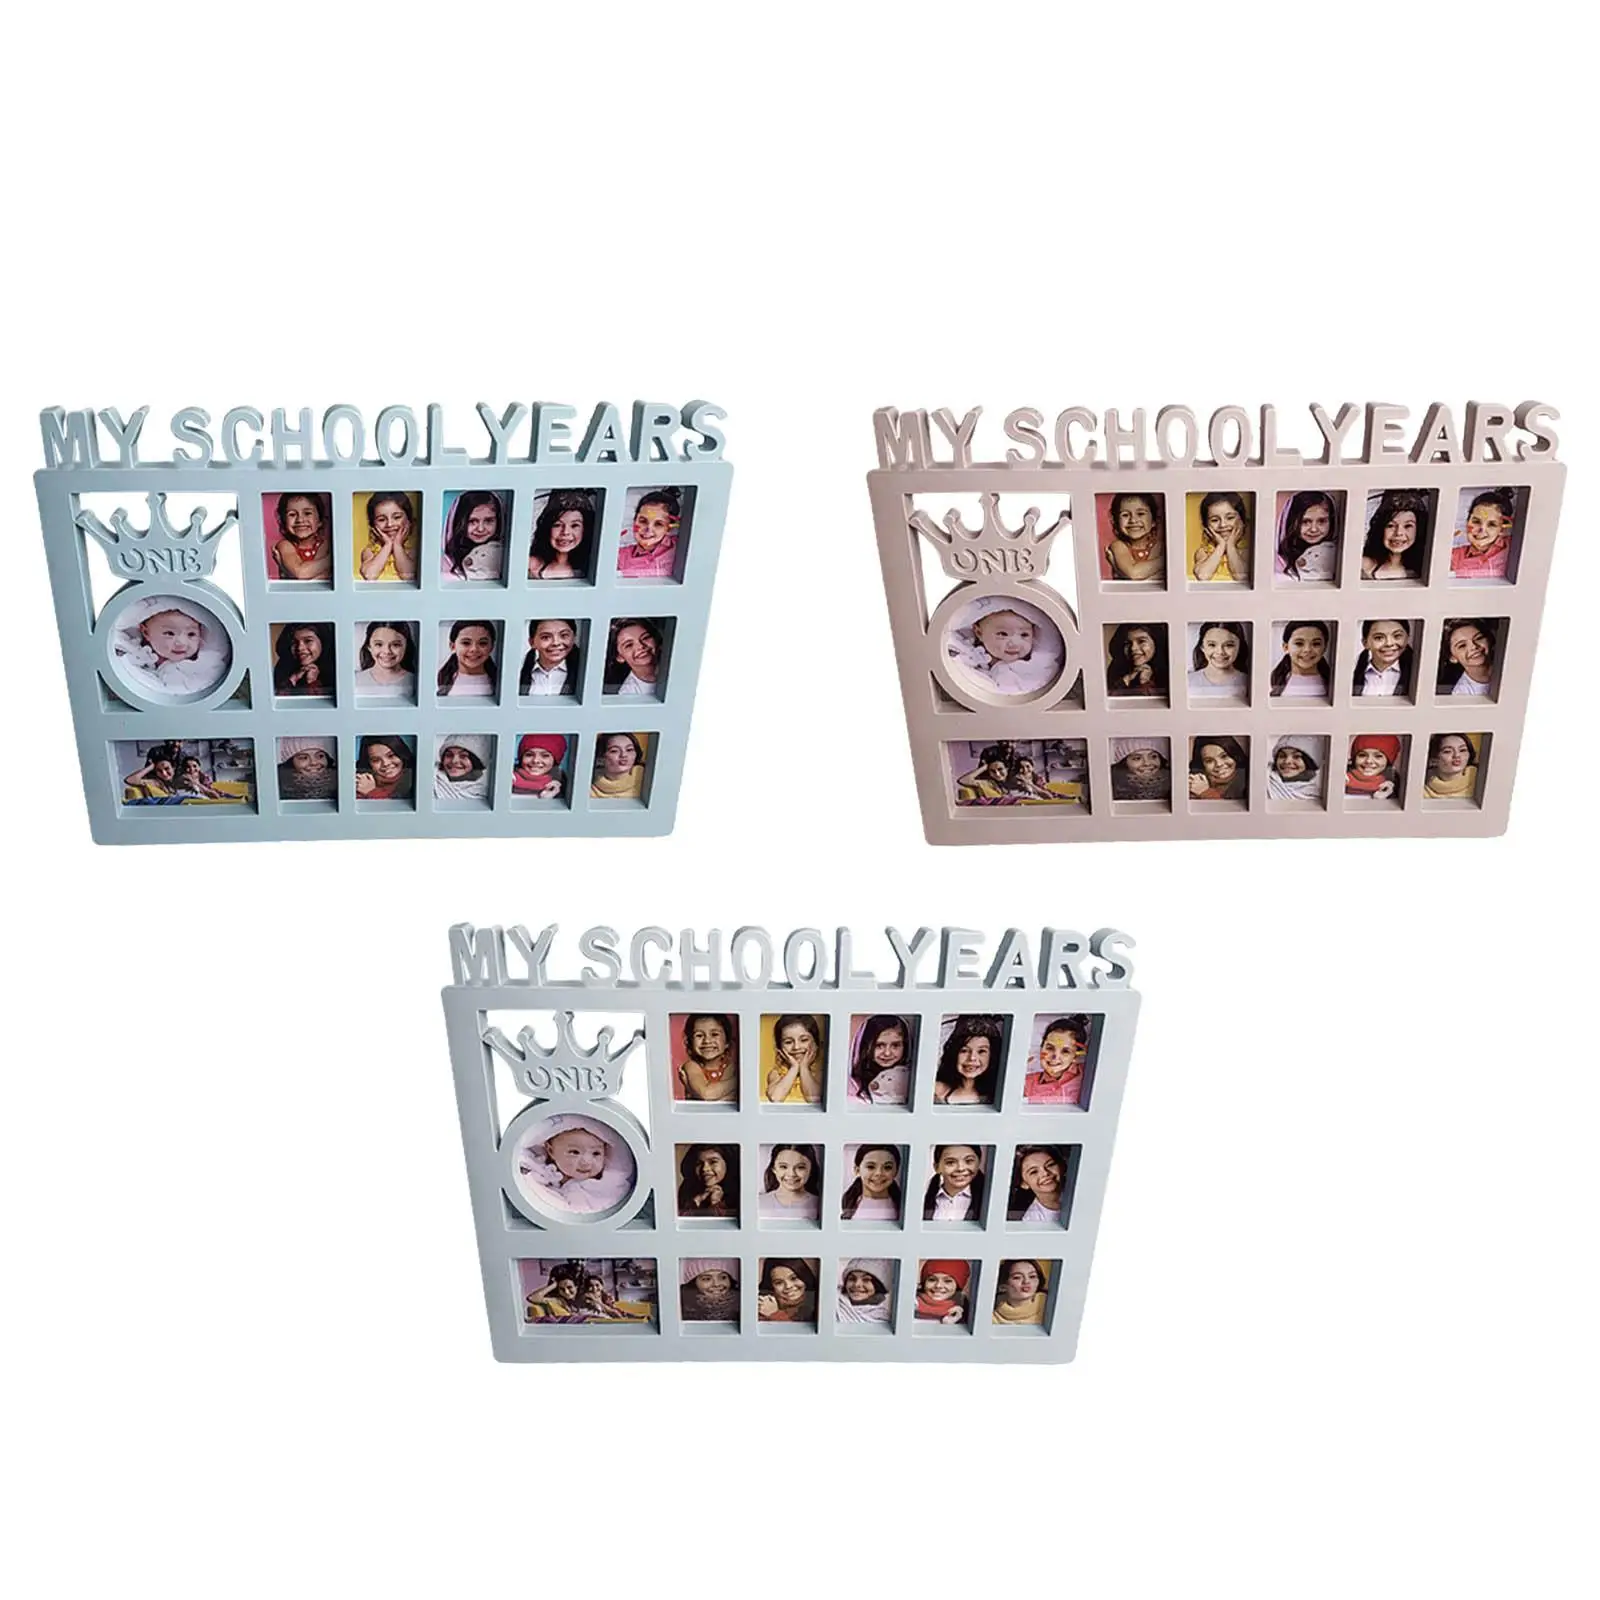 Novelty School Days Graduation Frame School Years Photo Collage Student Keepsake Picture Frame Kids Picture Frame for Students